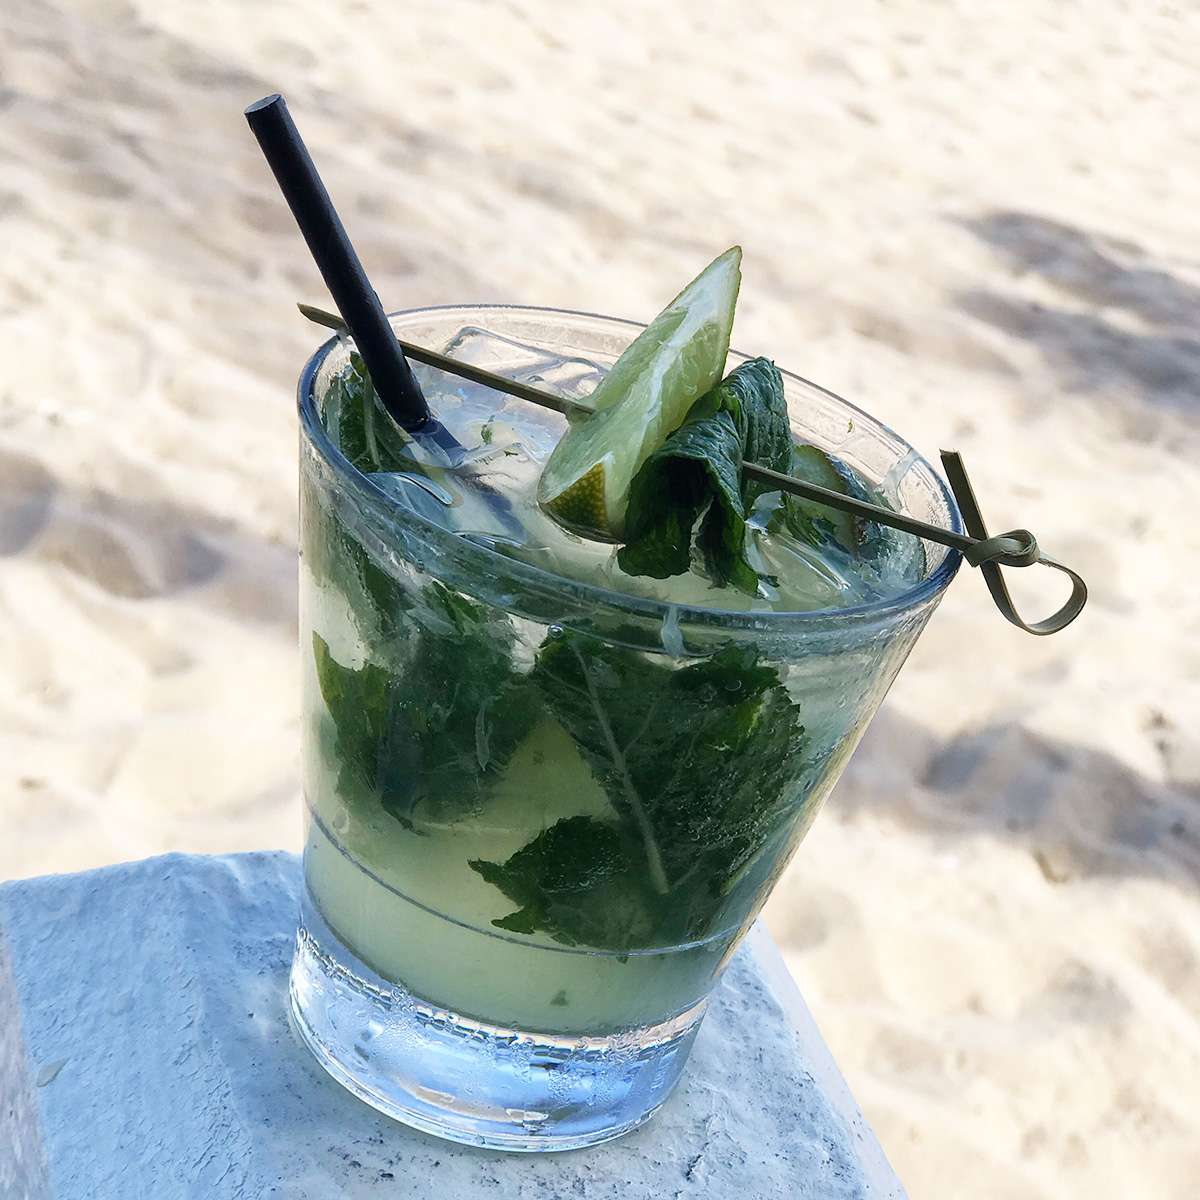 Thirsty Thursday's! 🌱🍹 7 dollar Mojito's Bacardi limon rum, freshly muddled lime, mint, sugar!  Happy Hour 4-7pm 50% off select drinks at the bars and appetizers starting at 4.95. 🌺🌊🌴 #happyhour #freshseafood #livemusic #islandcocktails #lbts #arubabeachcafe